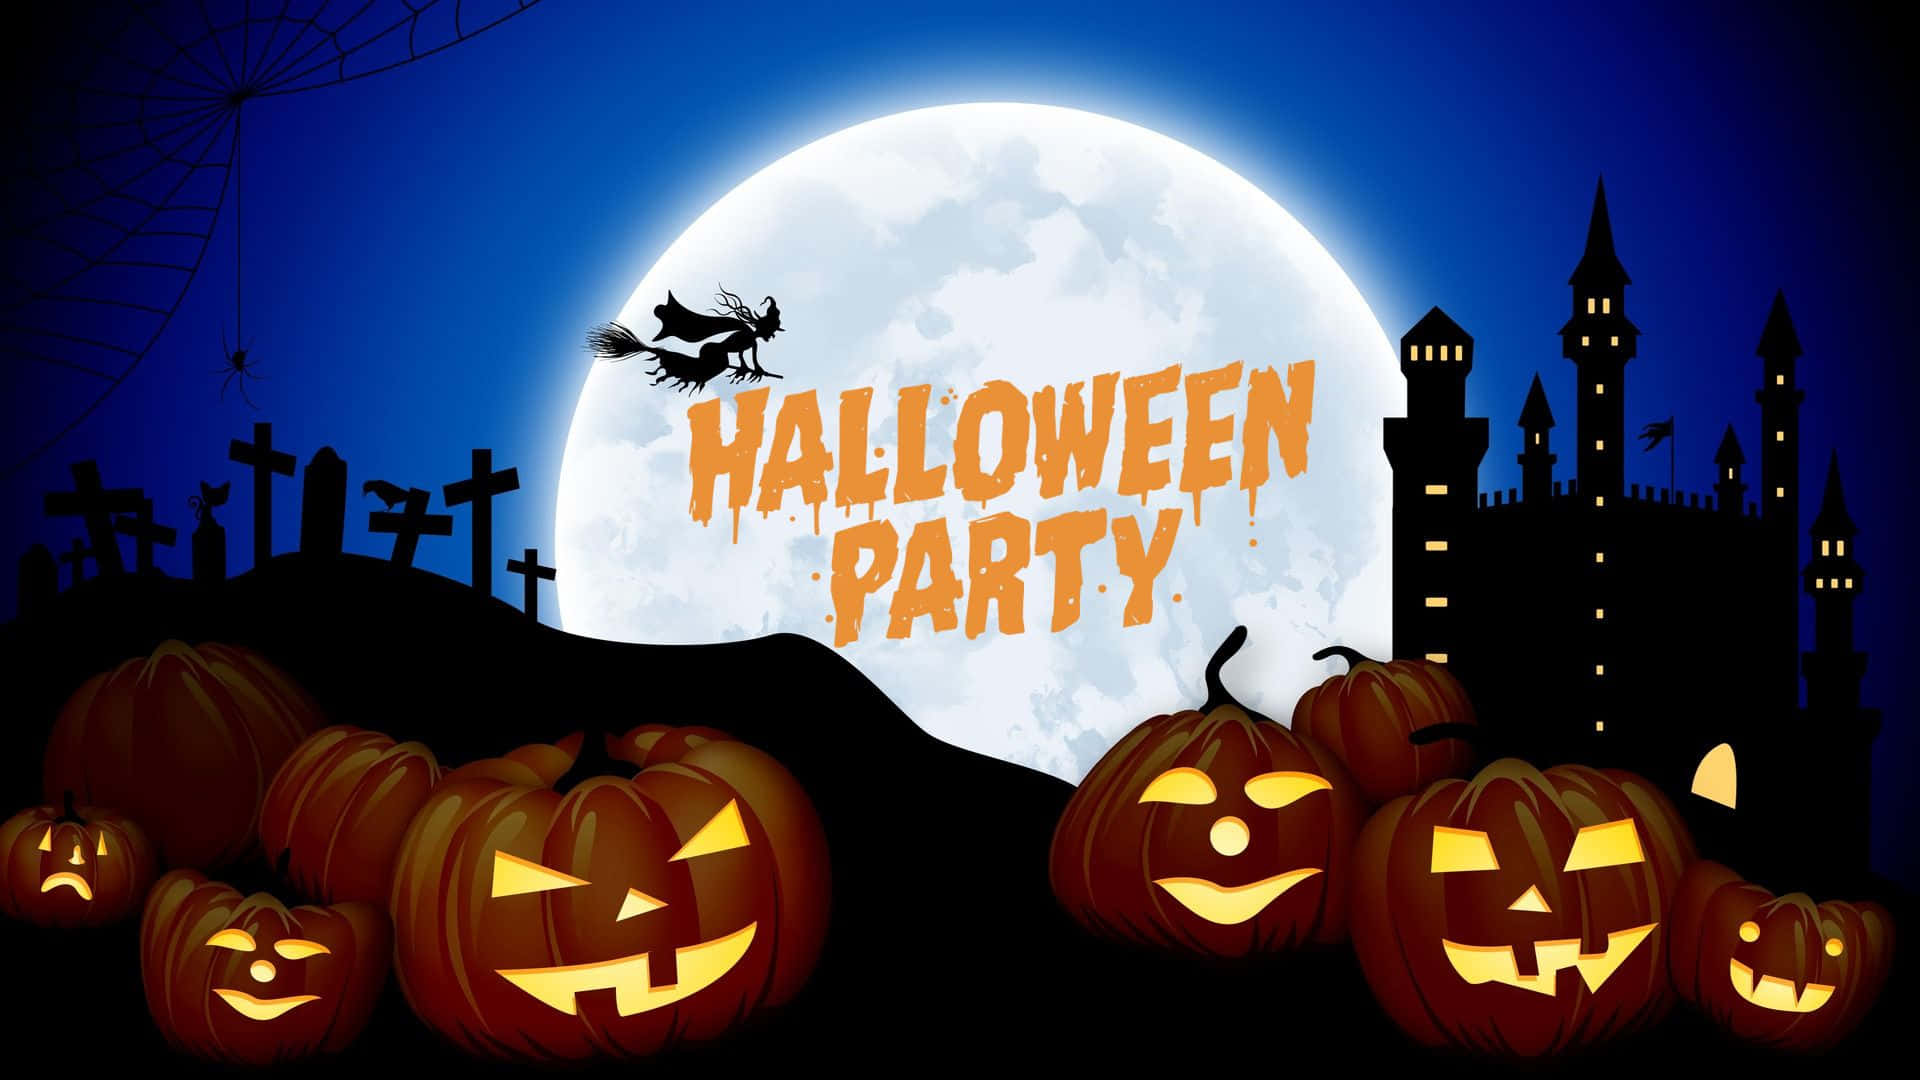 Get ready for a spooky and fun Halloween Party!